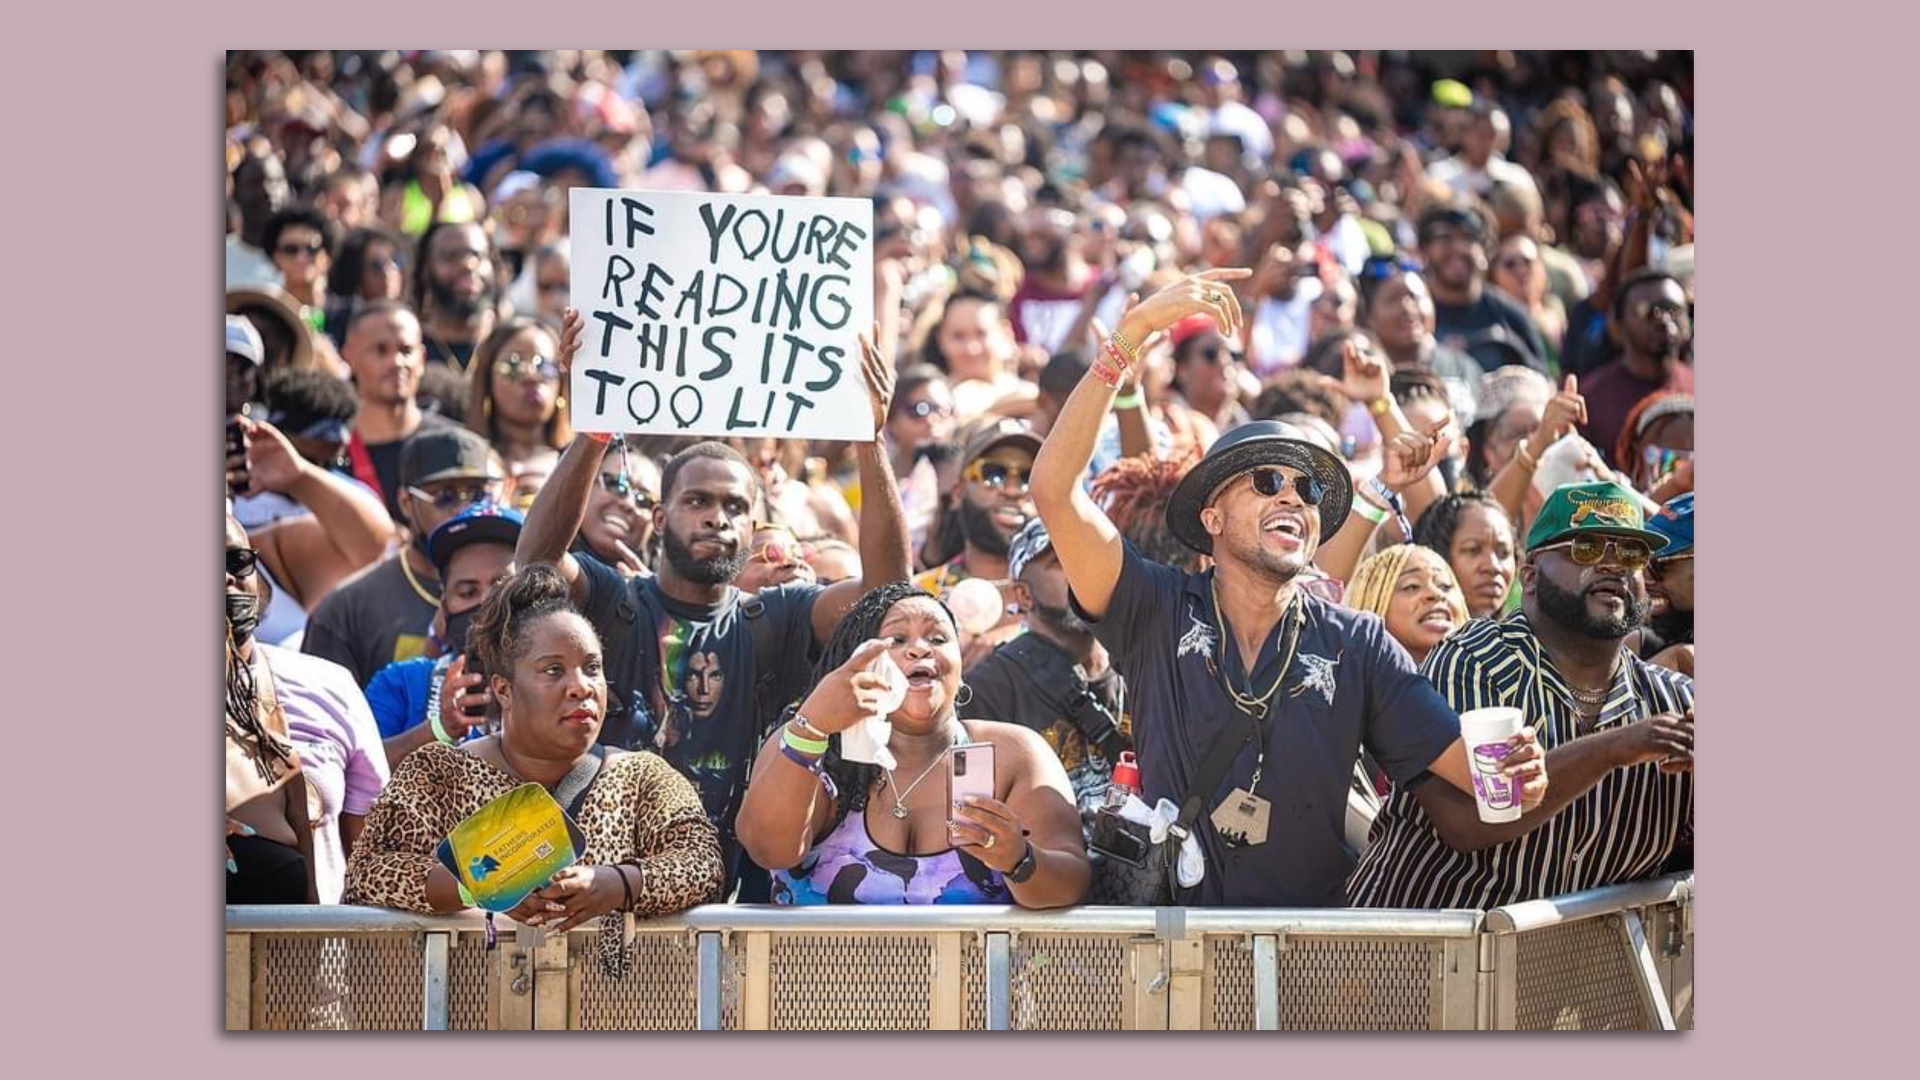 A large crowd of people enjoy a concert while a man holds a sign saying "if you are reading this it's too lit."